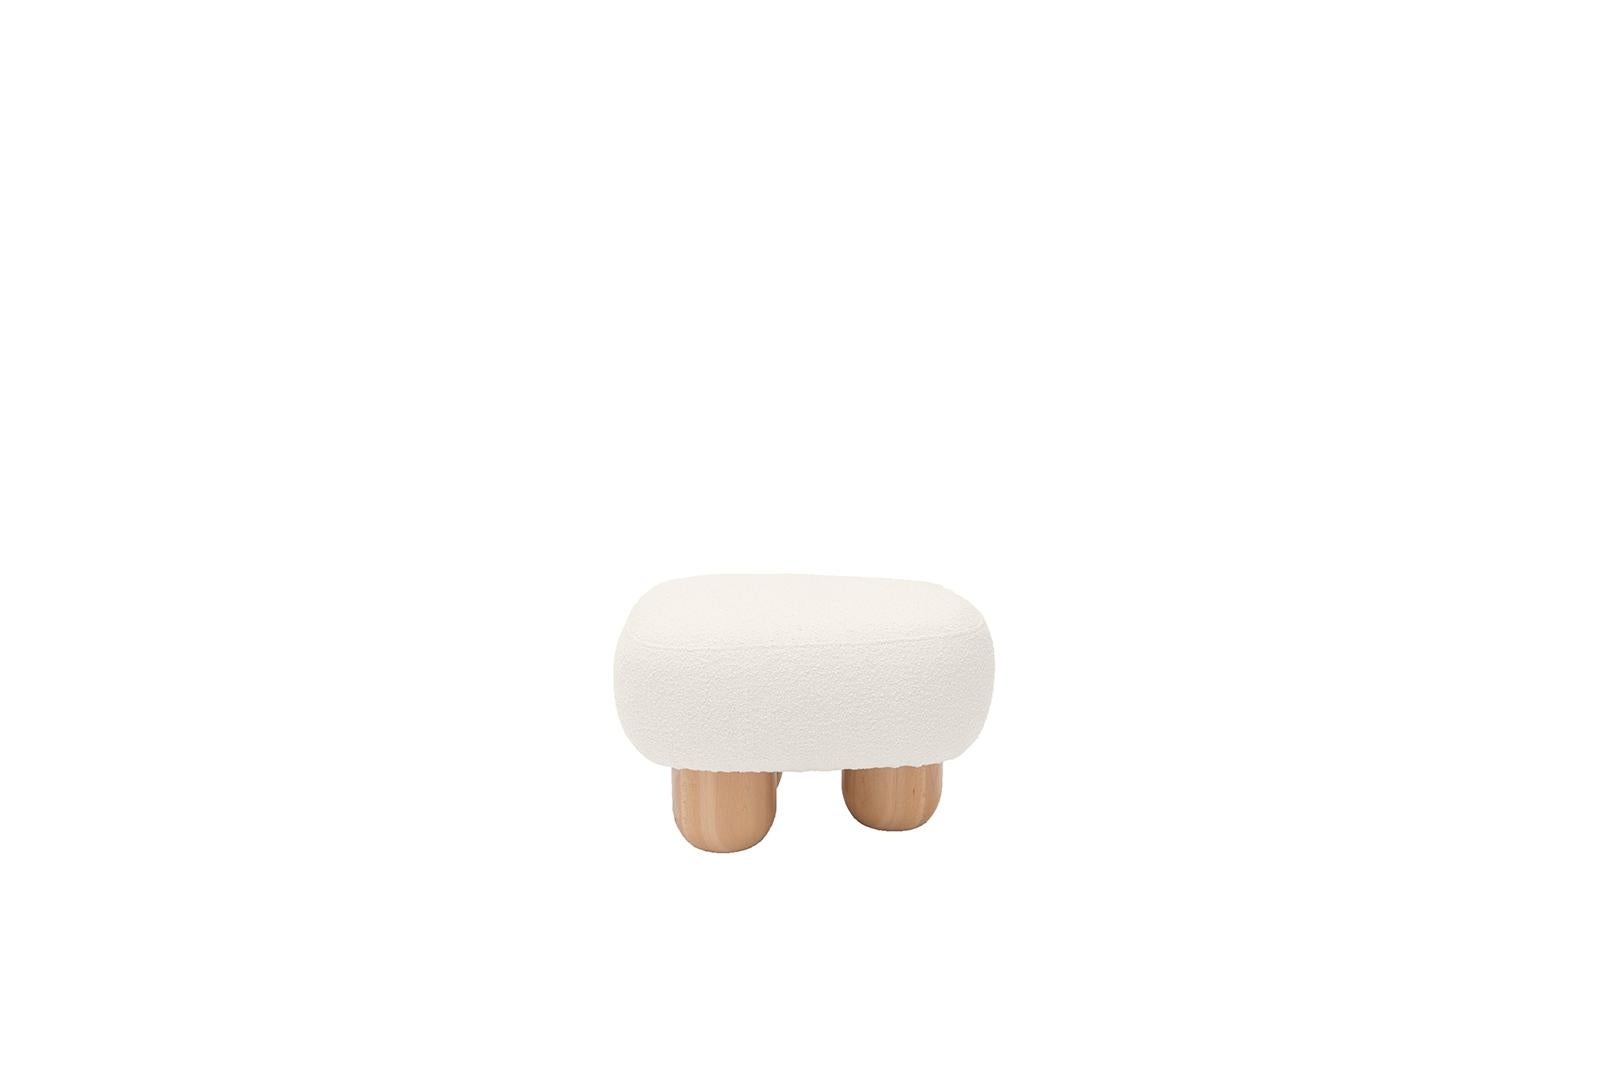 Object 049 Pearl Pouf by NG Design
Dimensions: D64 x W51 x H41 cm
Materials: Boucle upholstery, Solid Oak

Also Available: All of objects available in different materials and colors on demand.

Will you use the object049 pouf as an additional